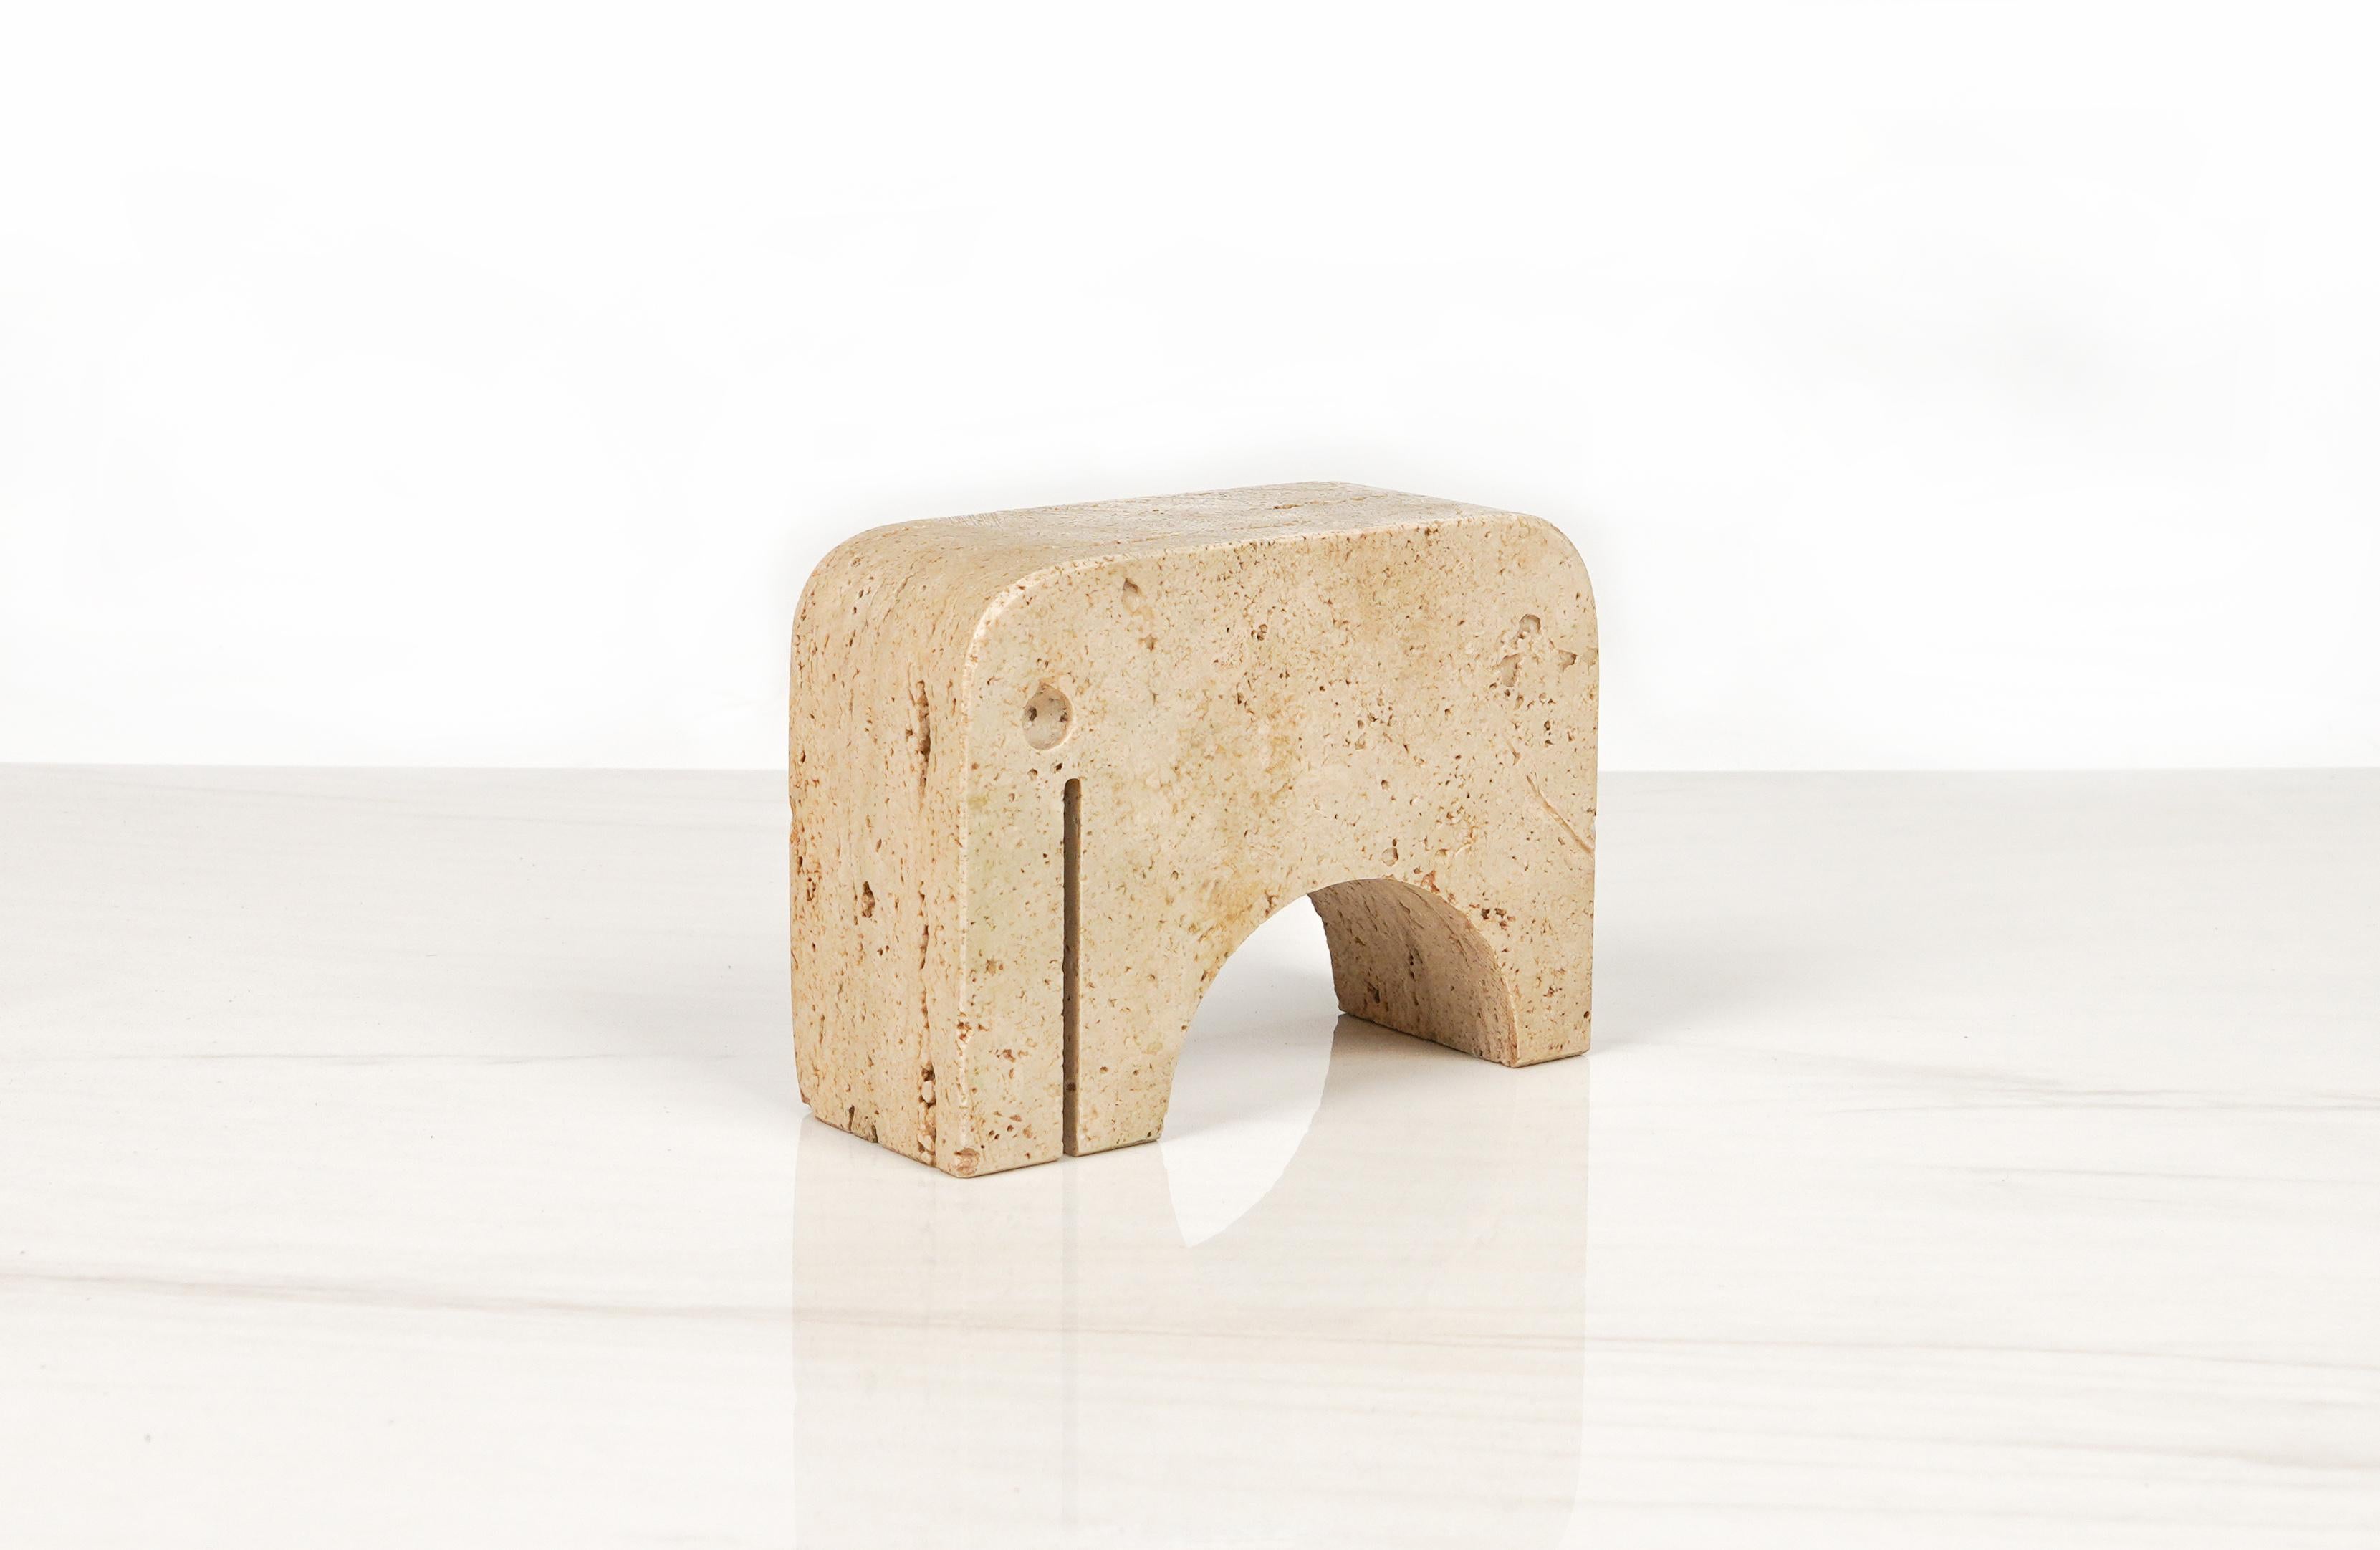 Travertine Elephant Sculpture / Bookend by Fratelli Mannelli, Italy 1970s For Sale 3